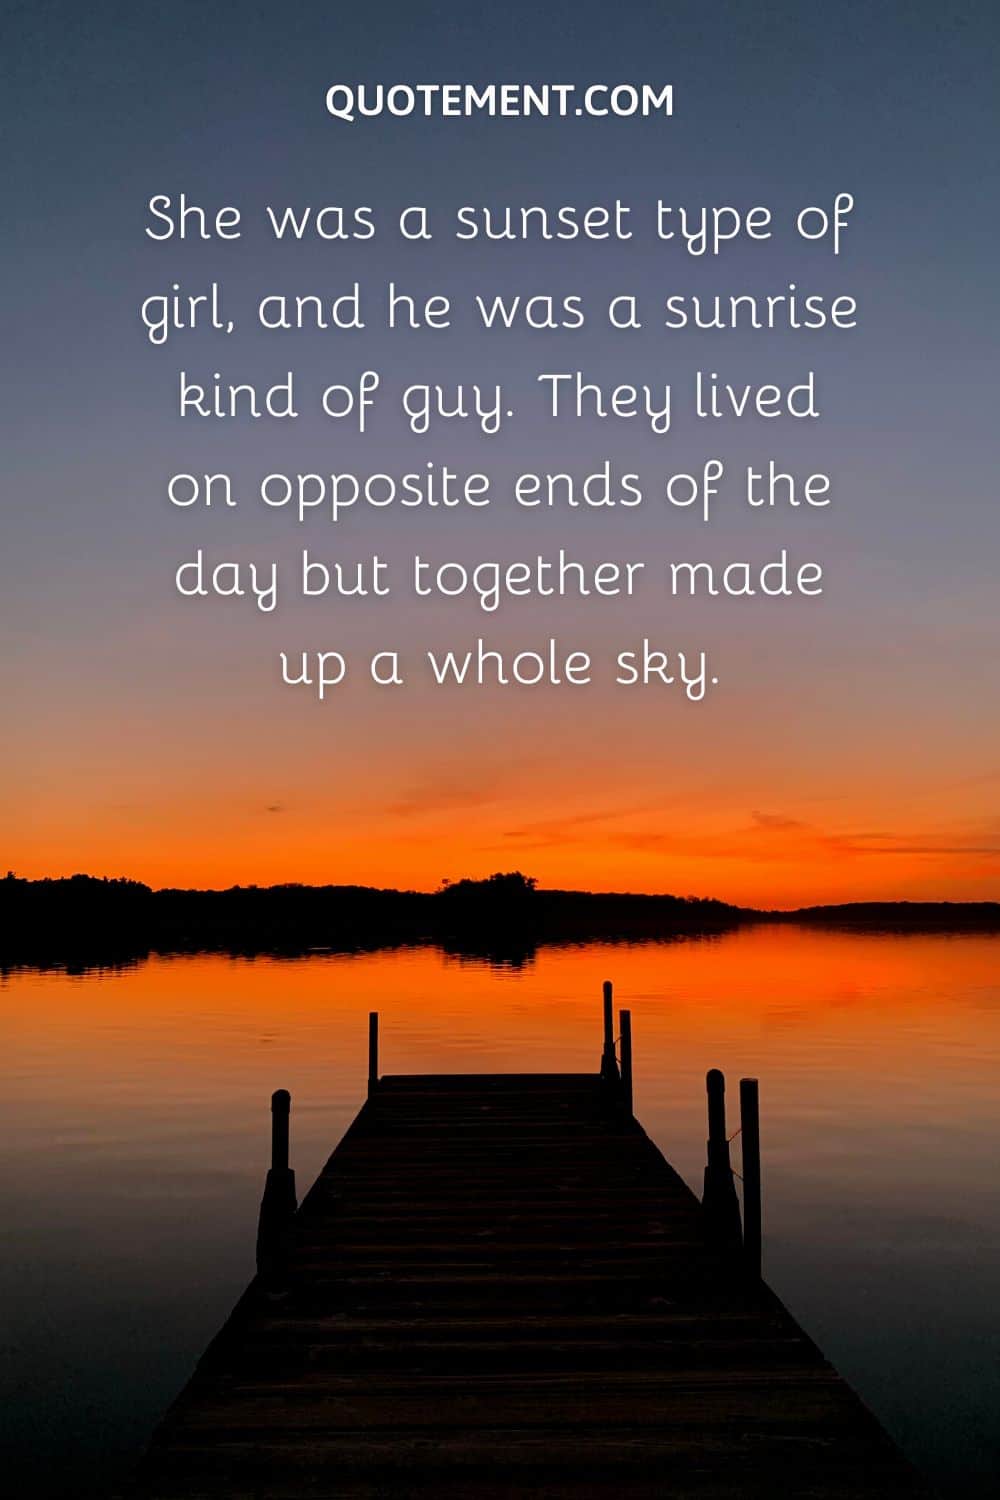 She was a sunset type of girl, and he was a sunrise kind of guy. They lived on opposite ends of the day but together made up a whole sky.